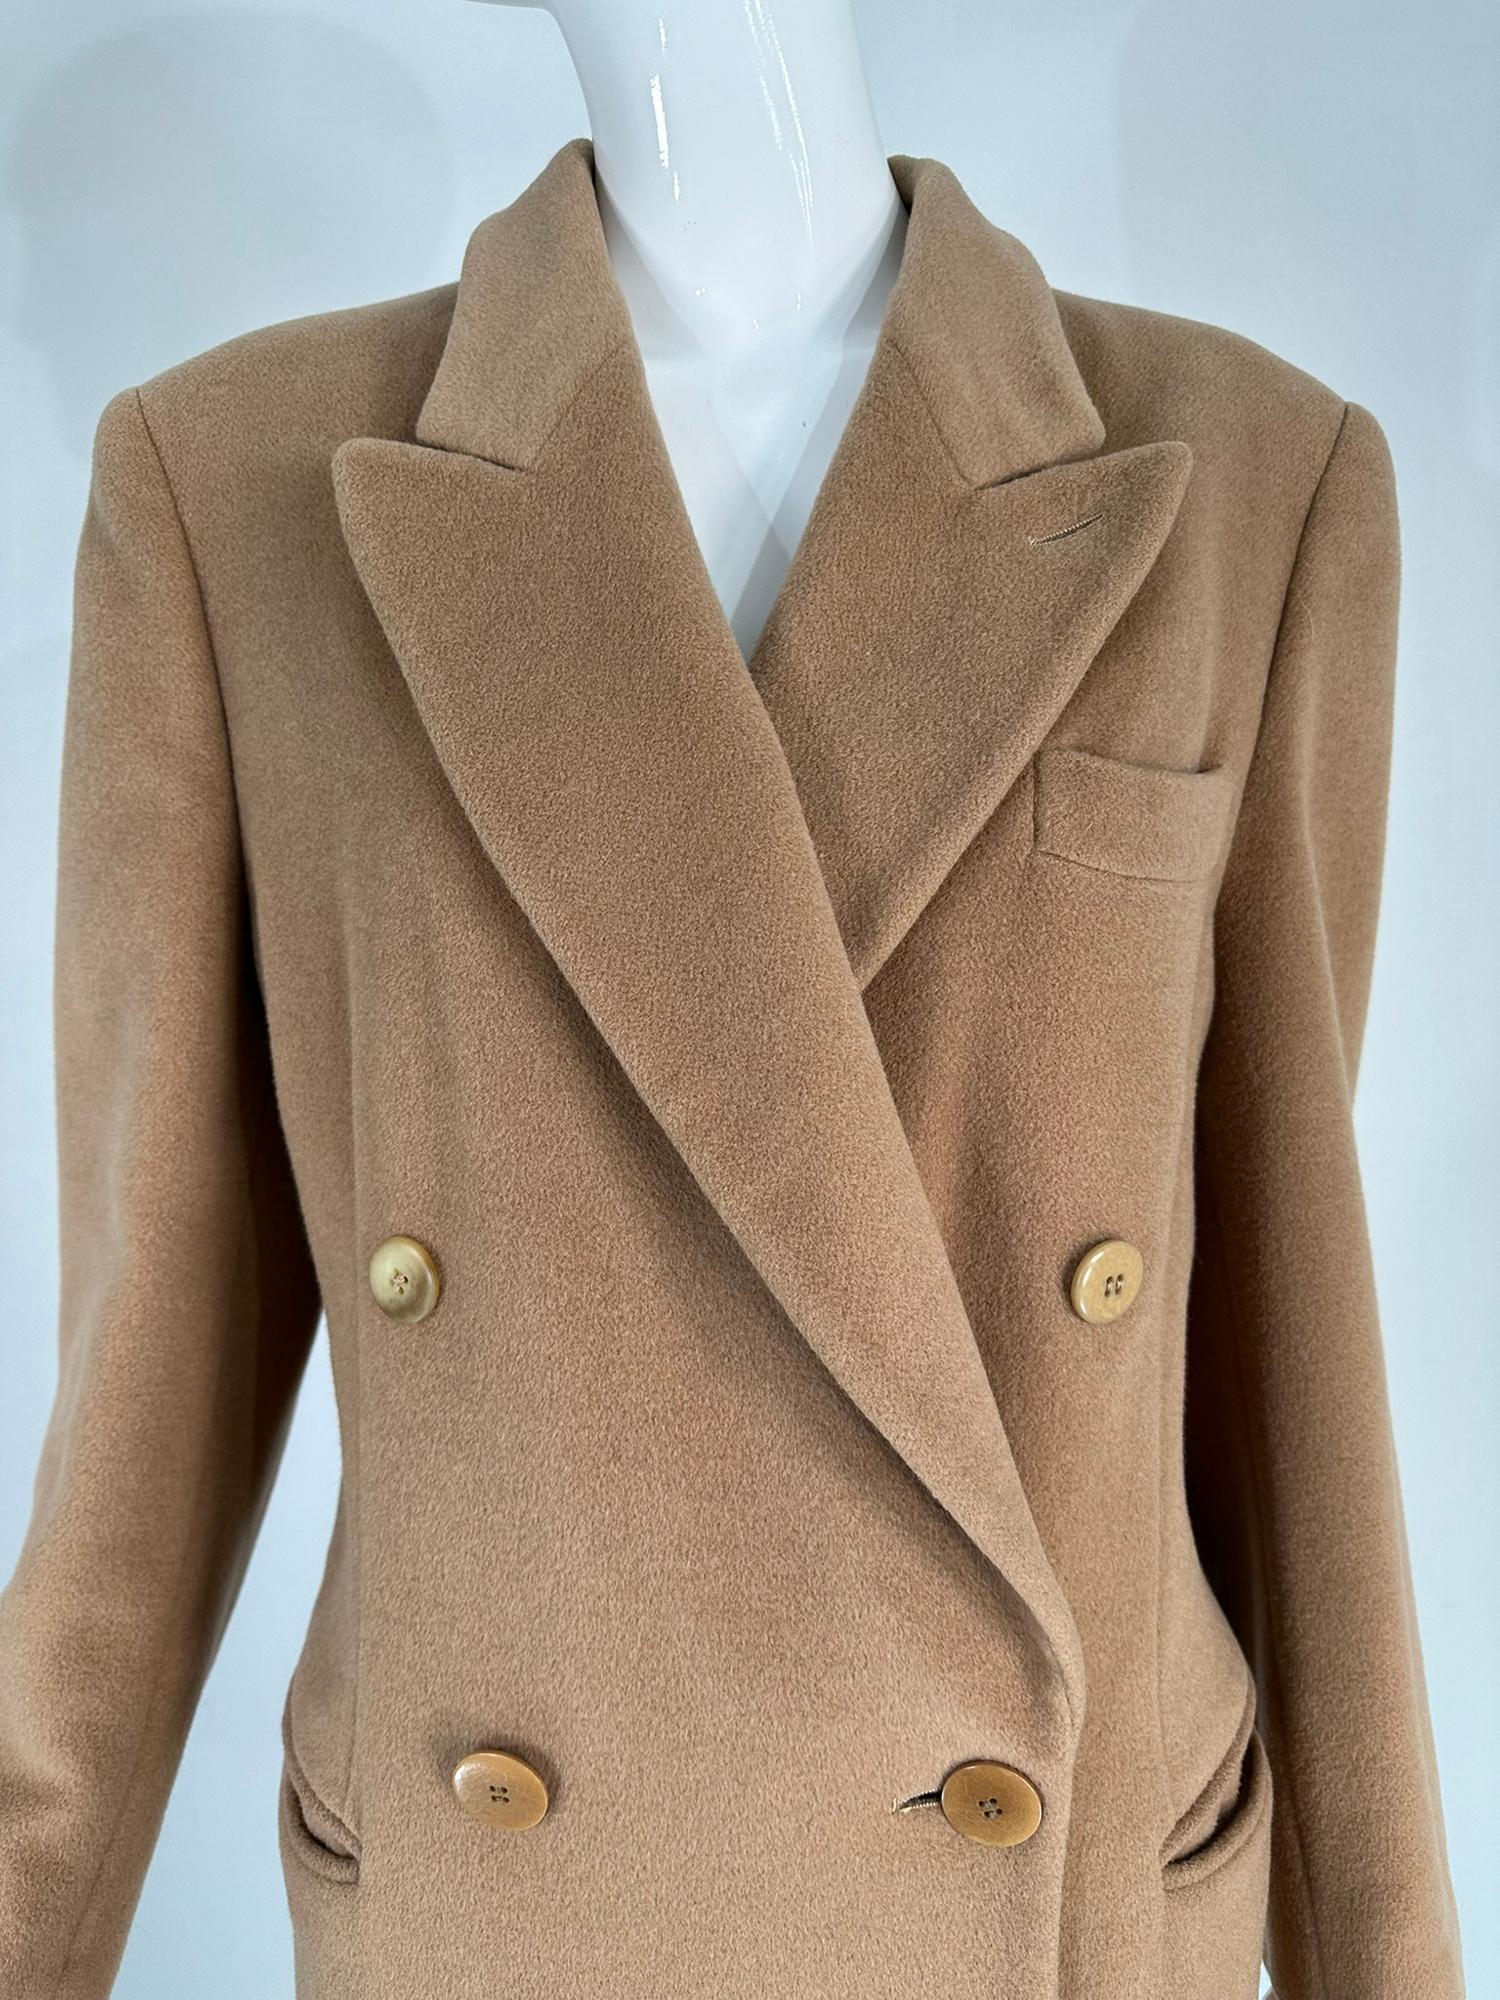 Giorgio Armani camel hair classic double breasted coat from the 1990s. A classic coat with sleek Italian design influences. The coat features notched lapels, double breasted front with single breast pocket & horizontal besom hip pockets. The coat is